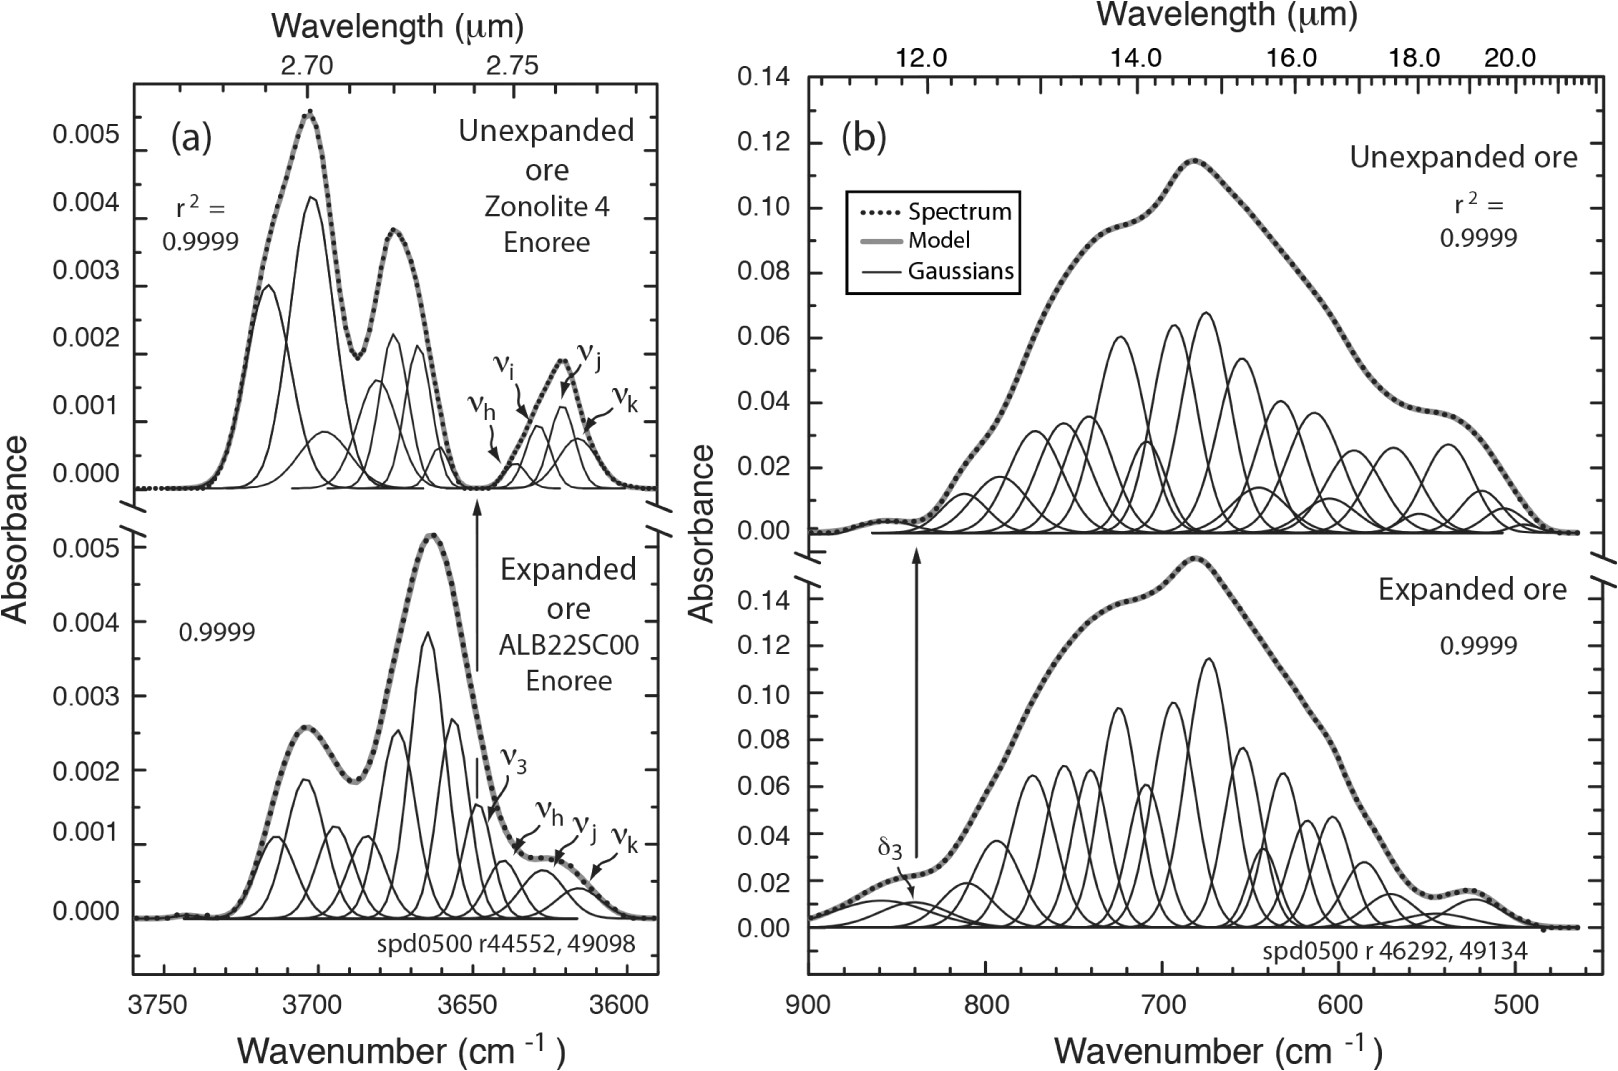 continuum removed absorbance spectra of the unexpanded zonolite 4 and expanded alb22sc00 ore samples from